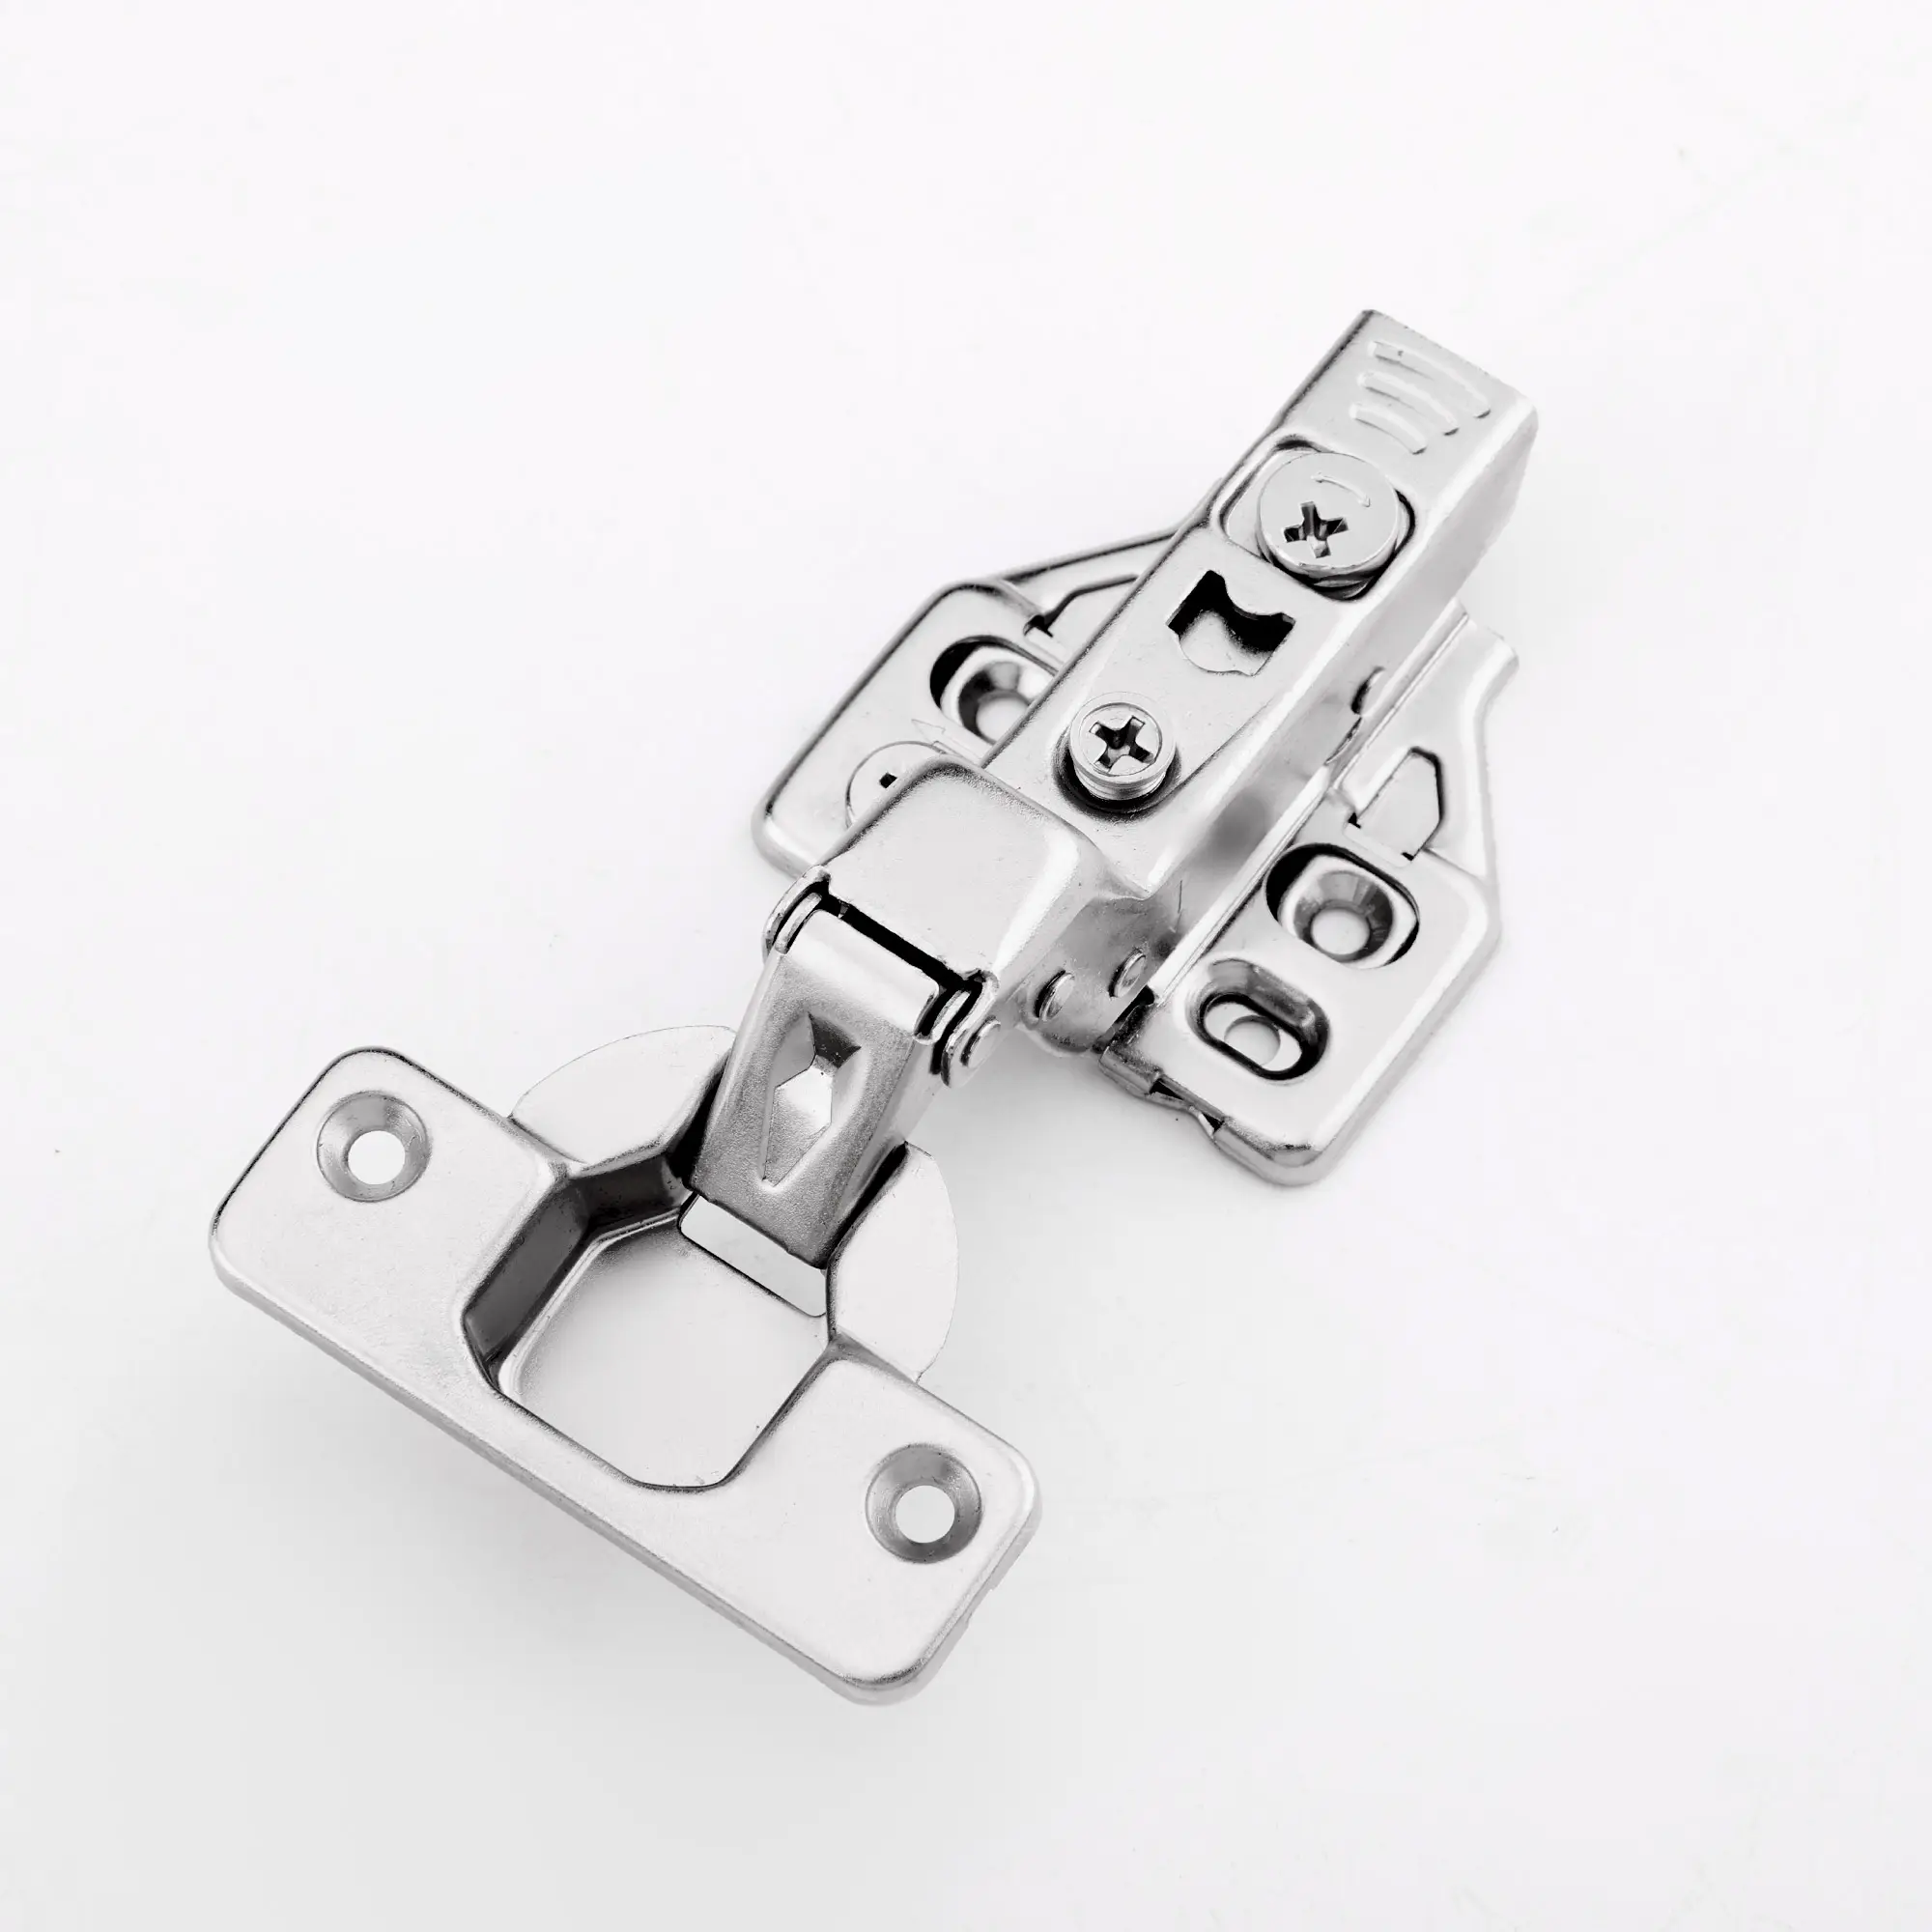 Furniture hinges cabinet 35mm buffer mute hydraulic 3d adjustable kitchen hinge hardware soft close damping concealed hinges